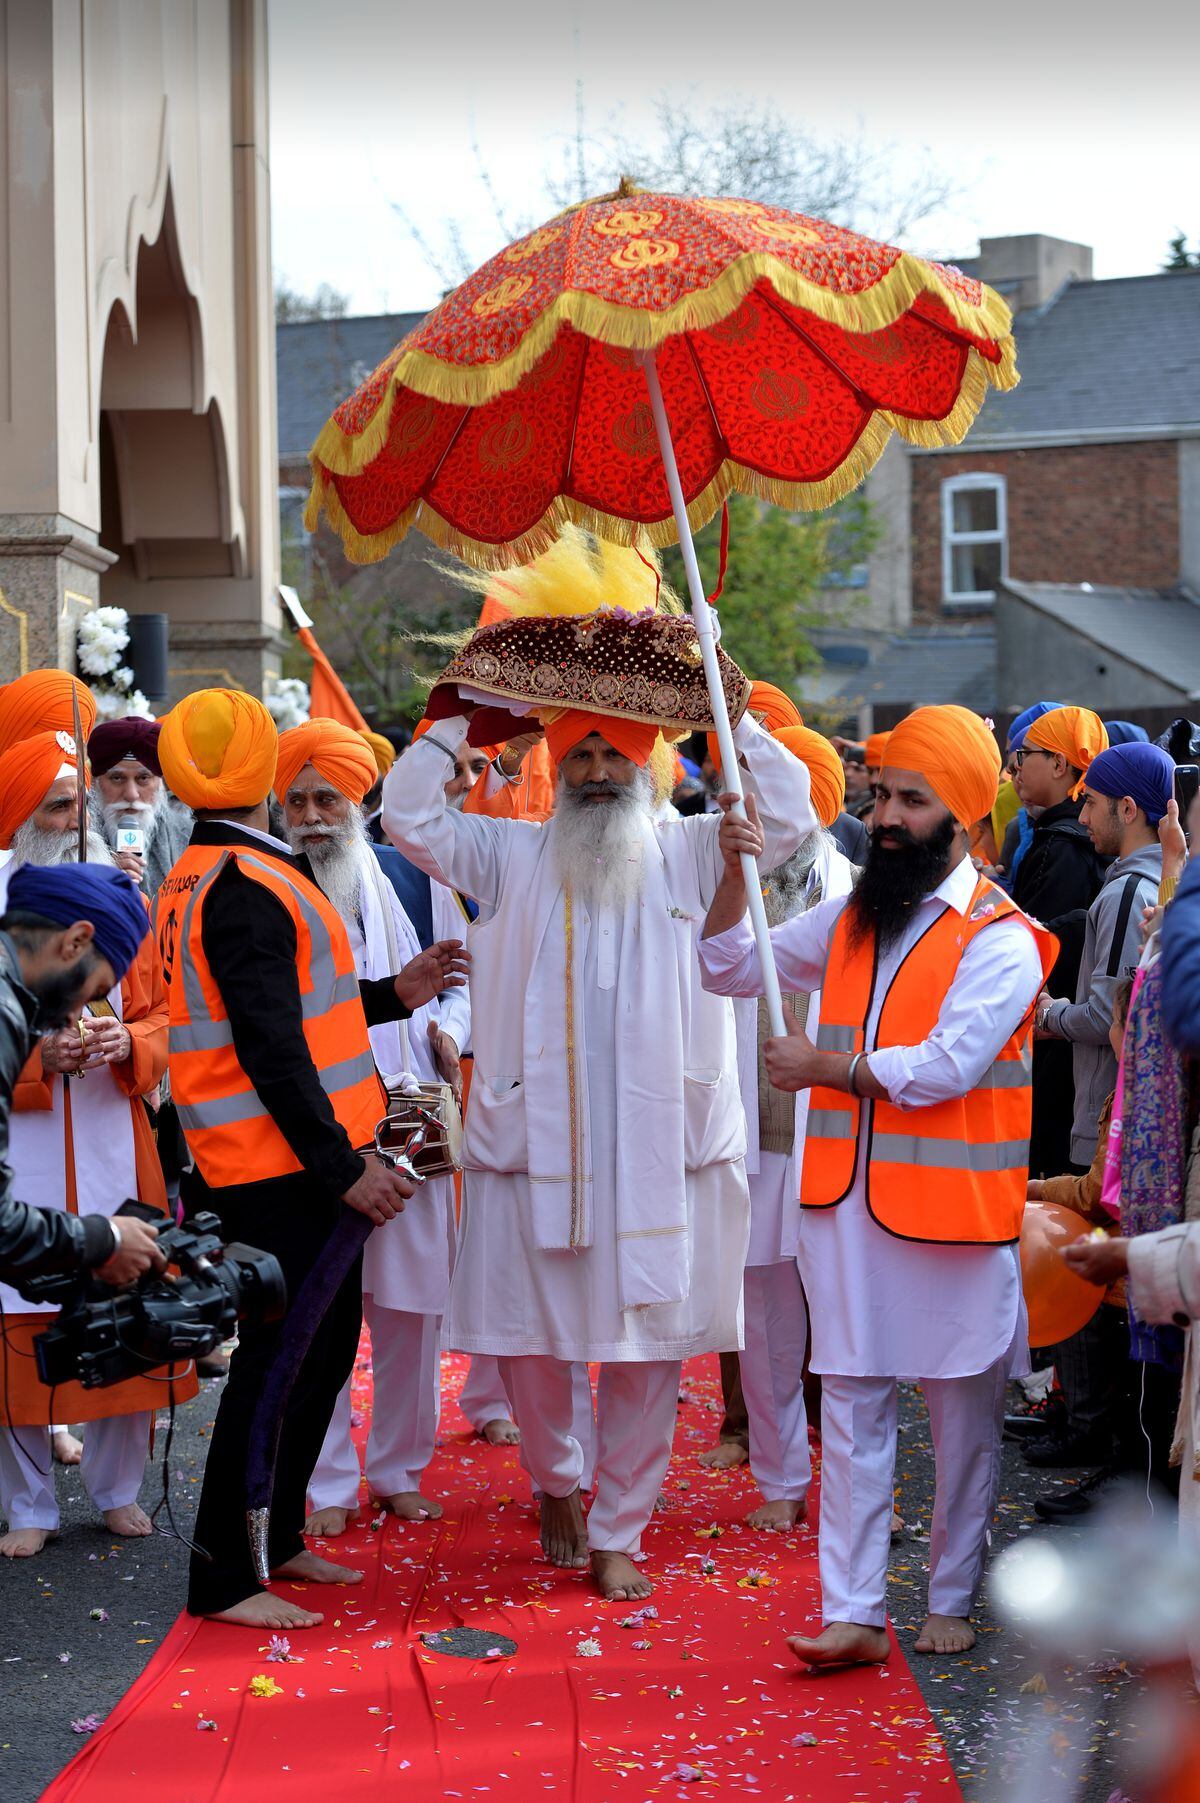 GALLERY Thousands line the streets for Vaisakhi celebrations Express